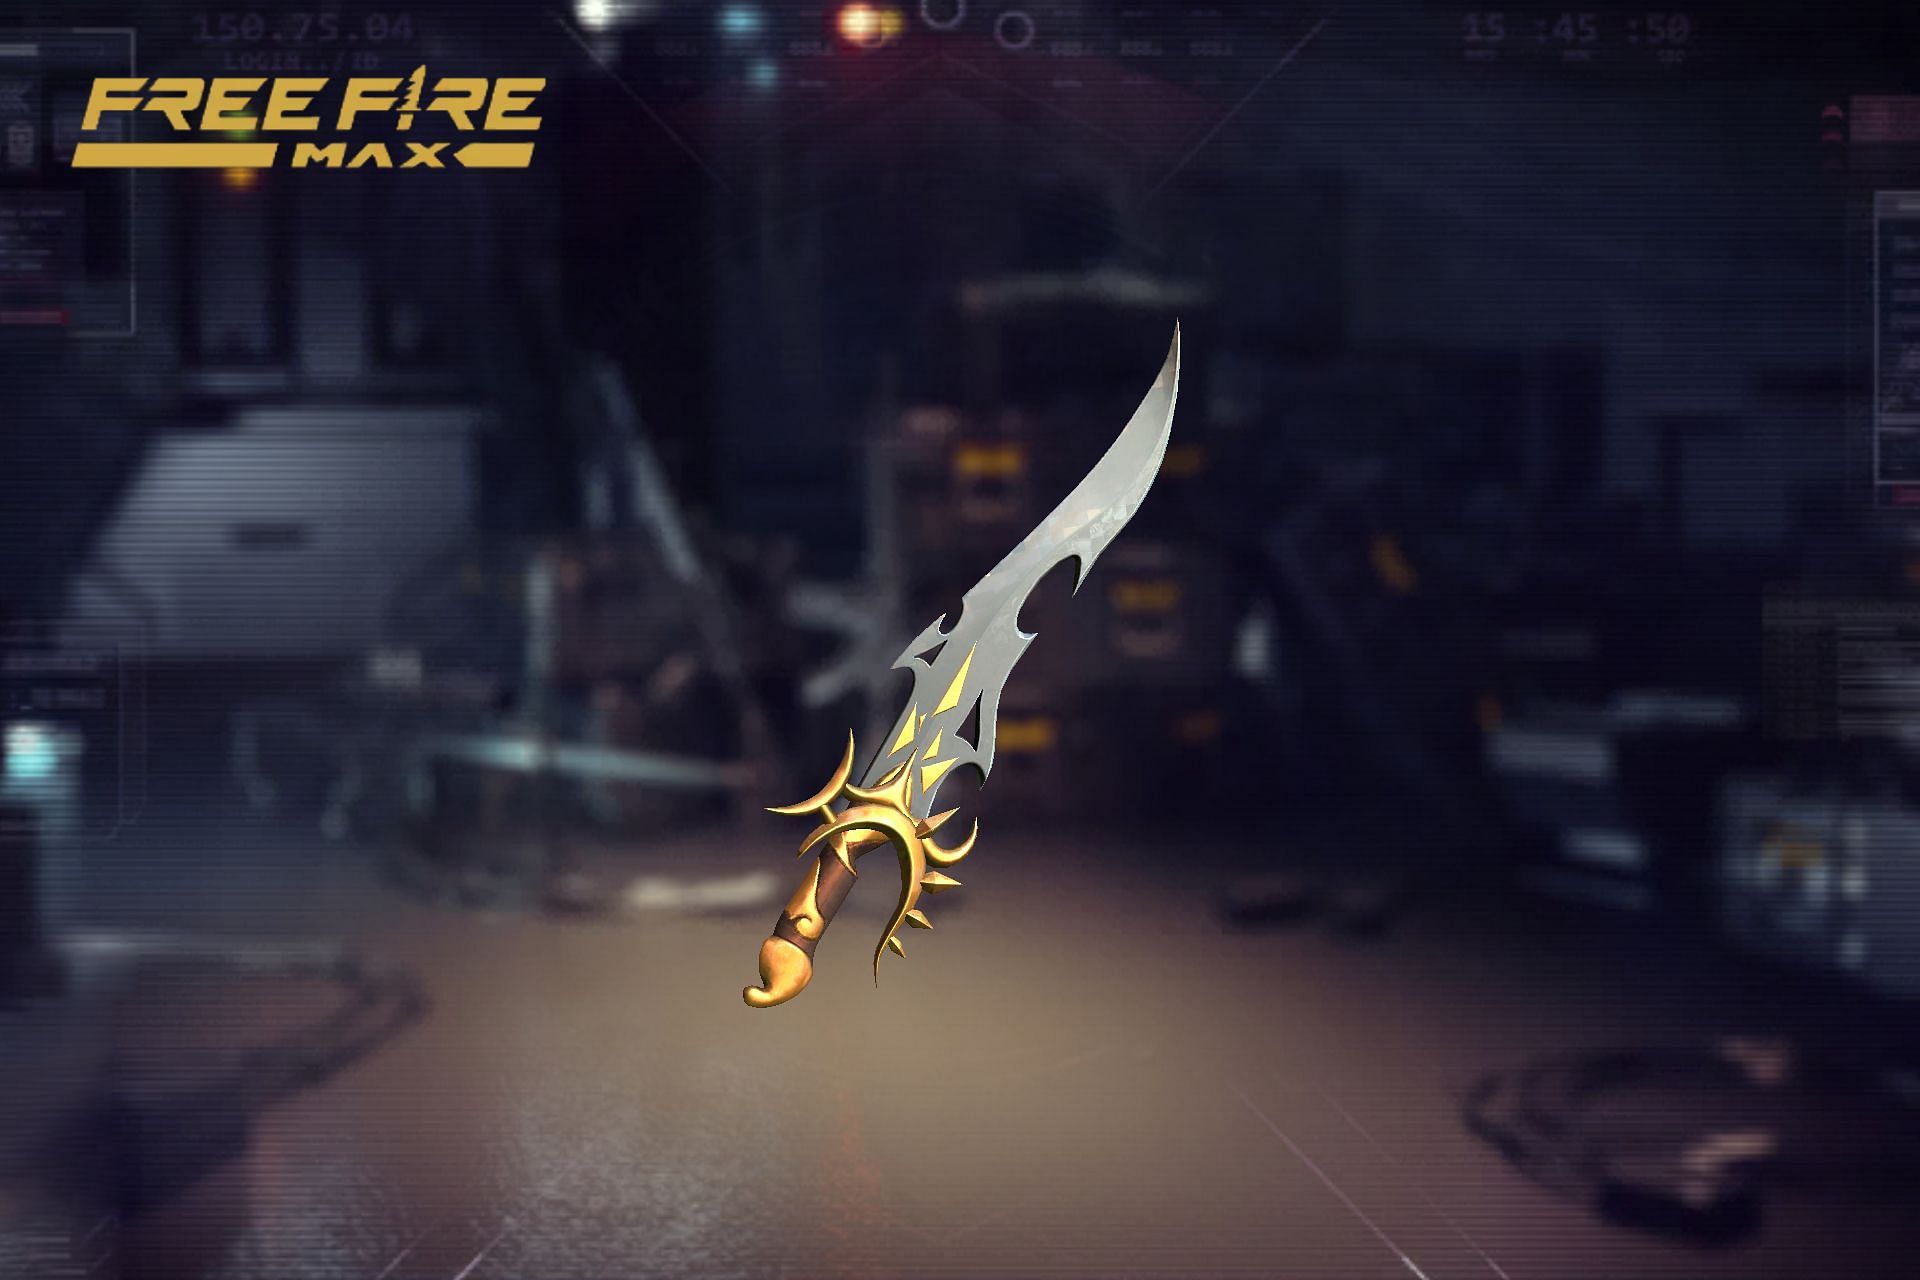 Blade of Glory in Free Fire MAX (Image via Garena)